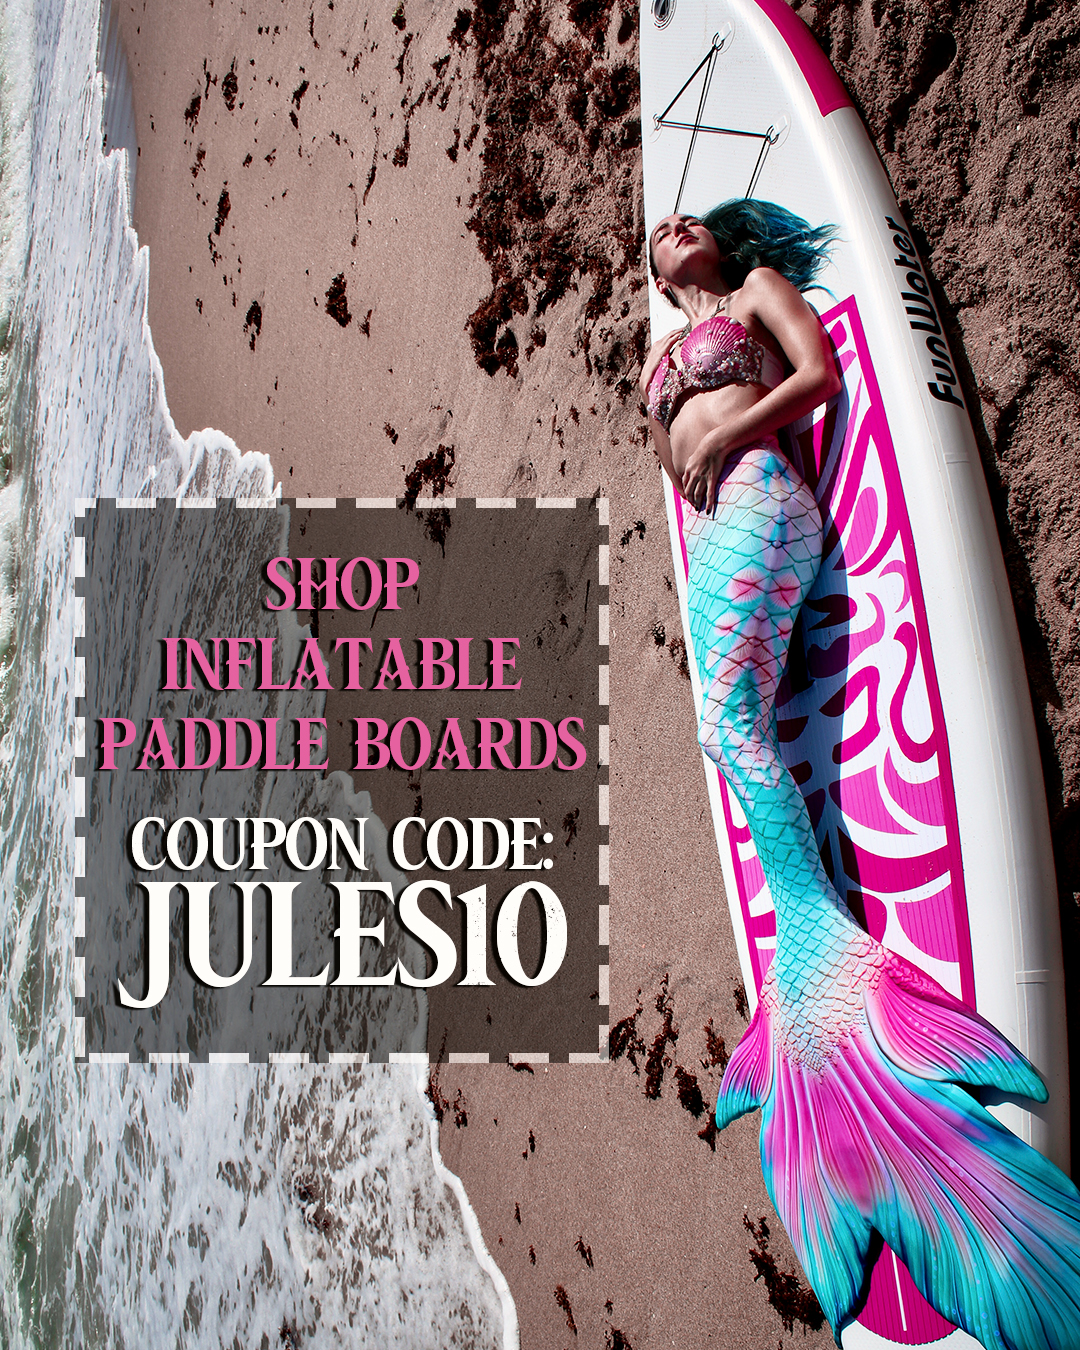 FunWater Paddle Boards coupon code for $30 discount: JULES10